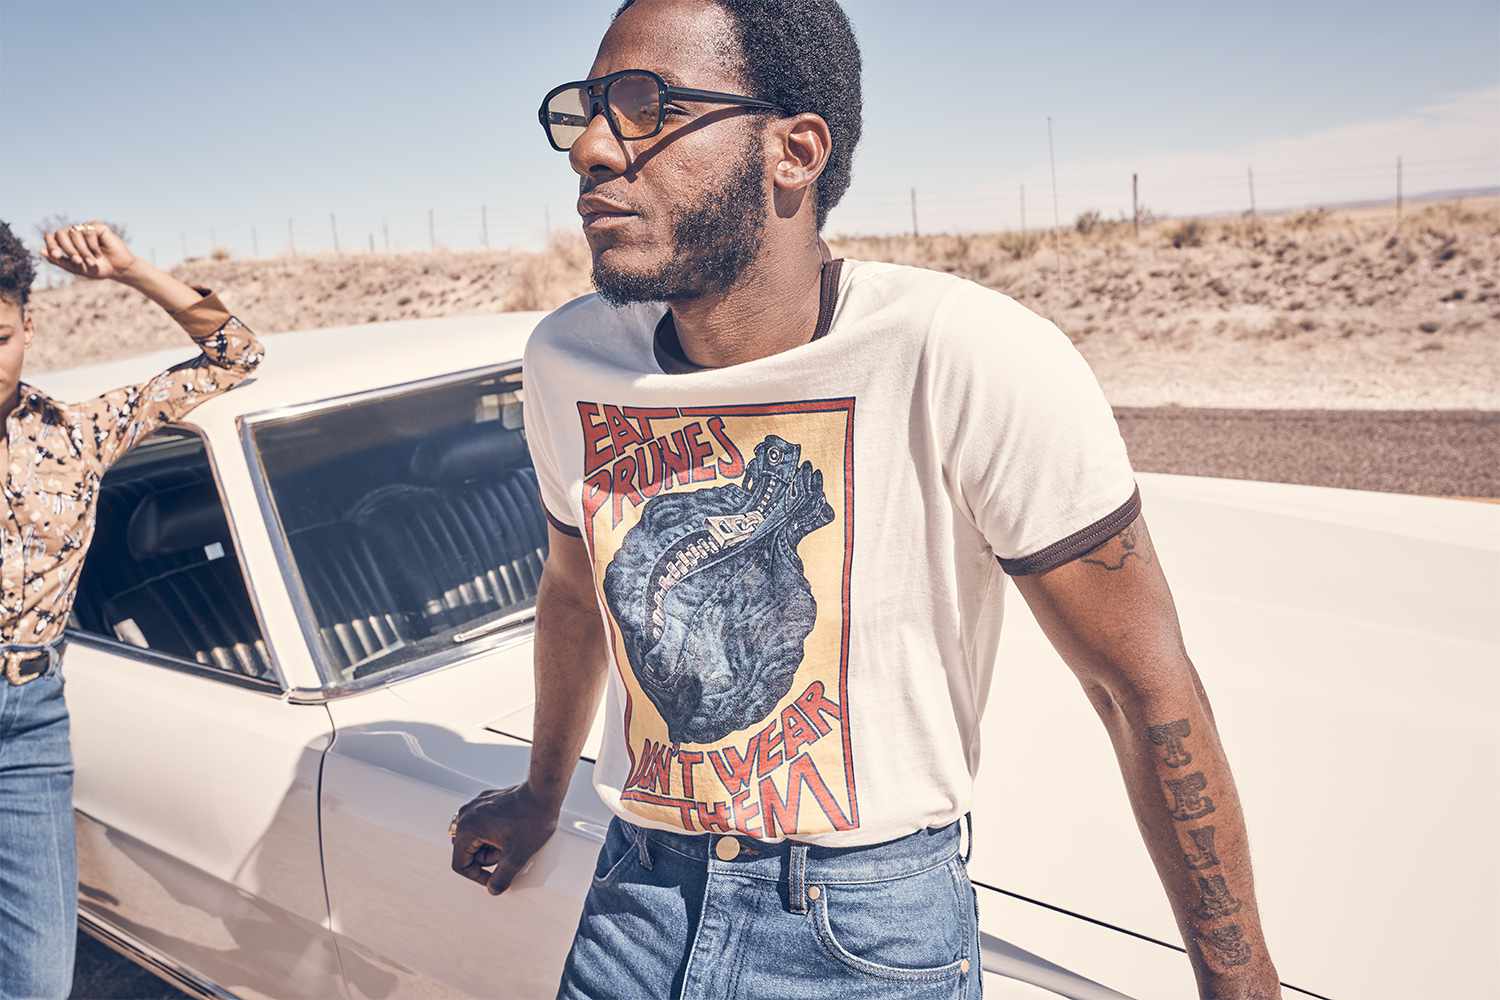 Musician Leon Bridges collaborated with wrangler for a 29-piece collection that launched in September